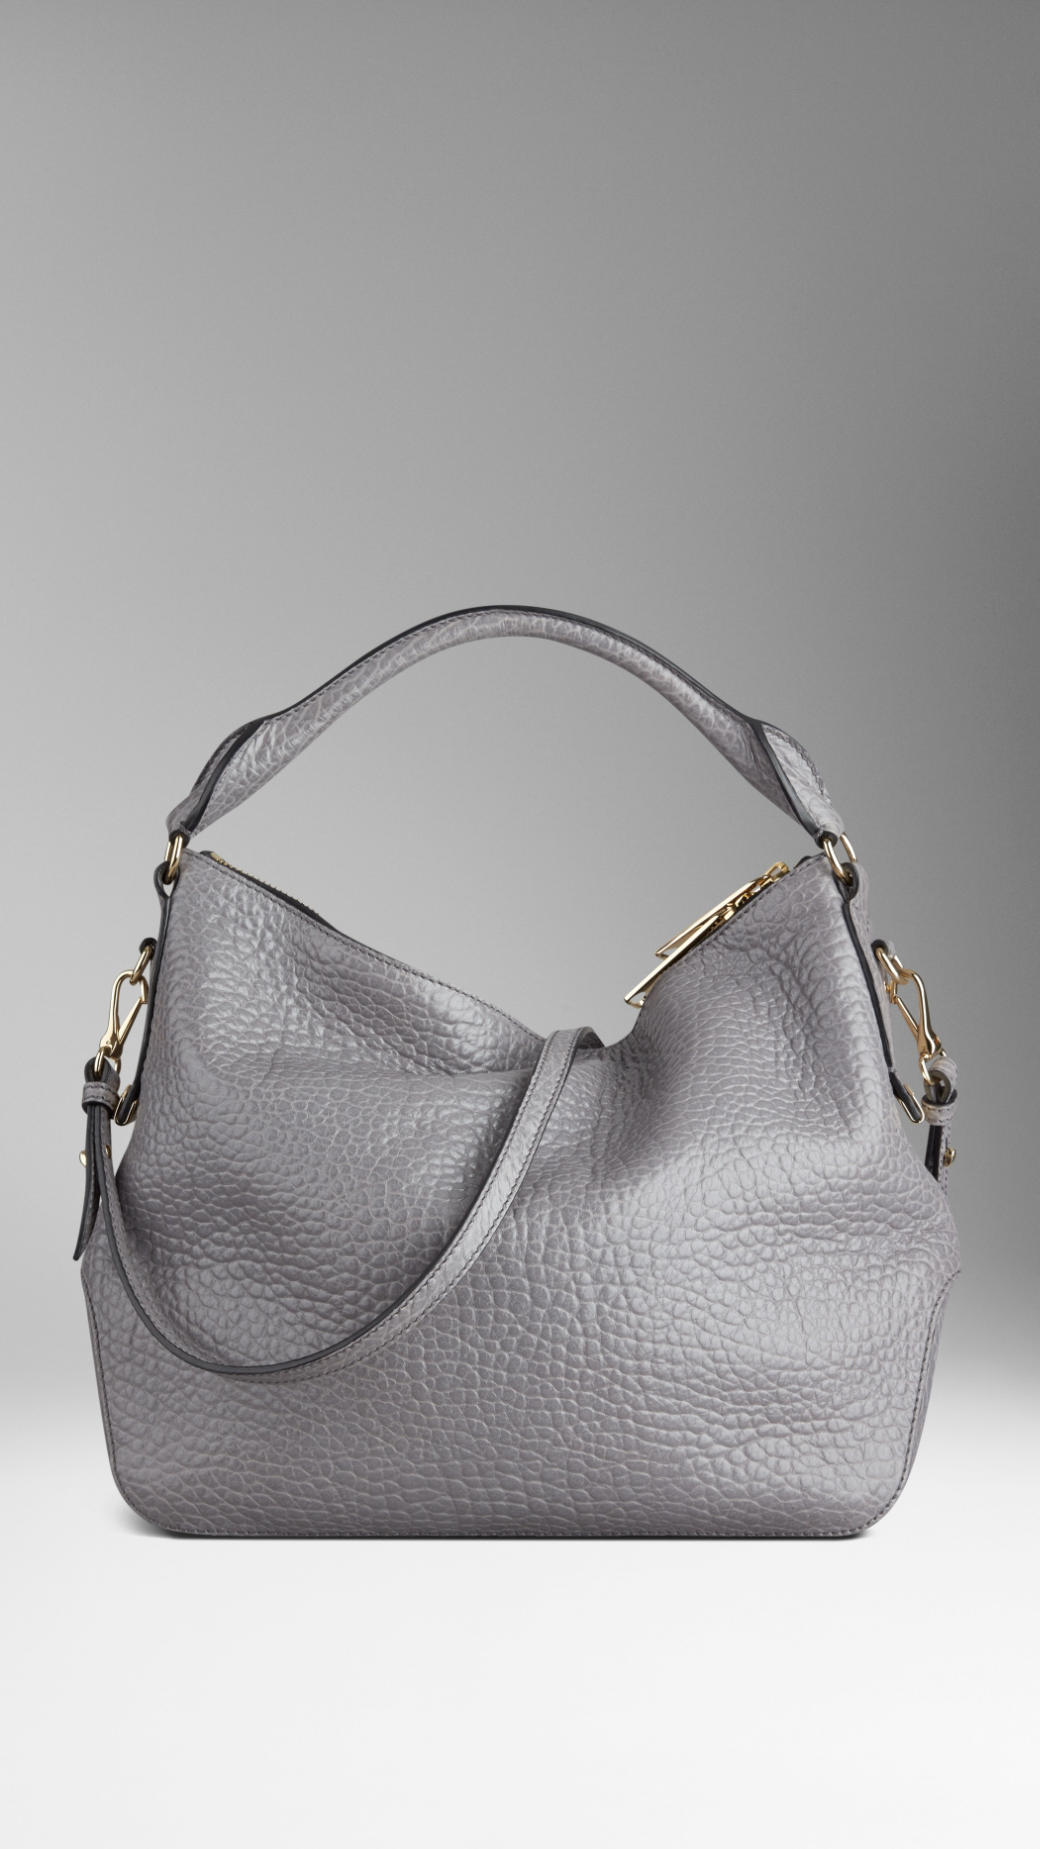 Lyst - Burberry Small Heritage Grain Leather Hobo Bag in Gray